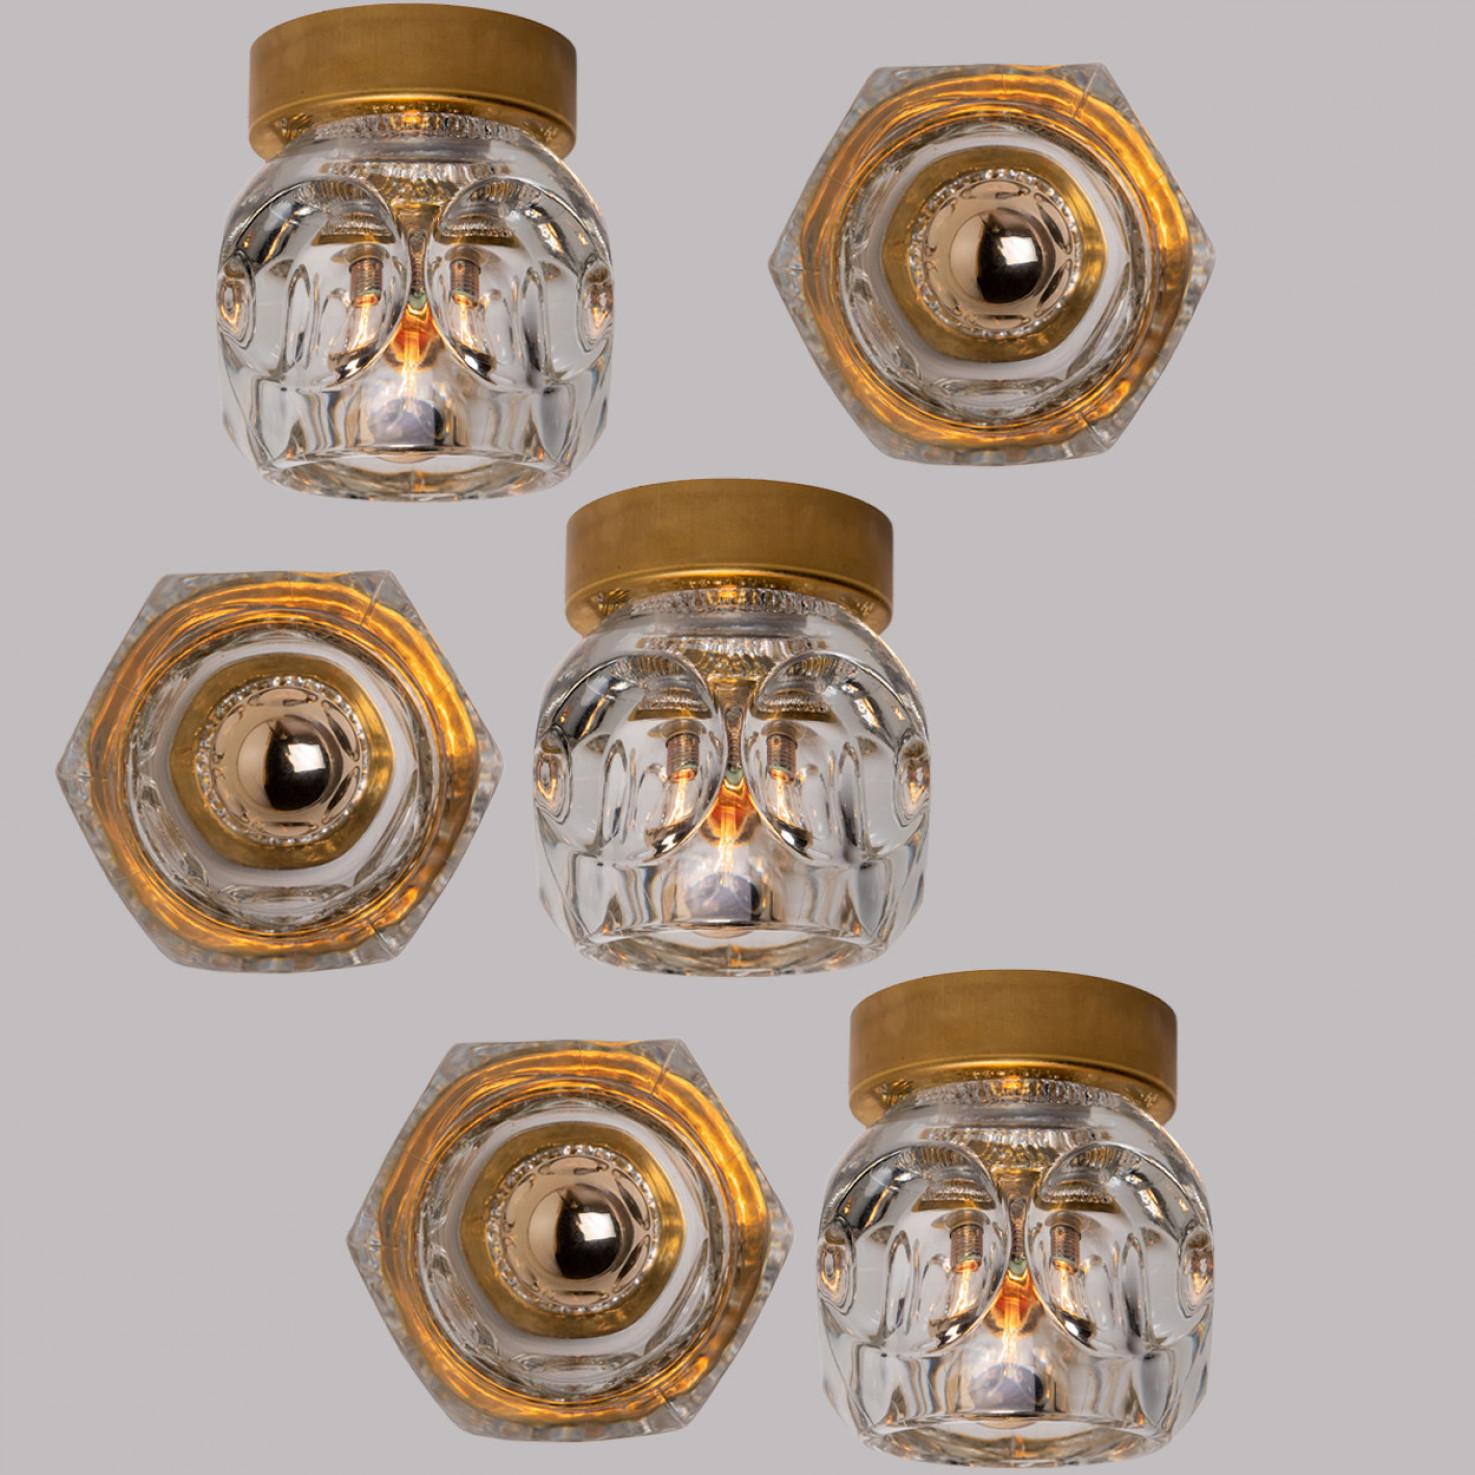 Several Brass Wall Sconces Flush Mounts Cosack Lights, Germany, 1970s For Sale 9